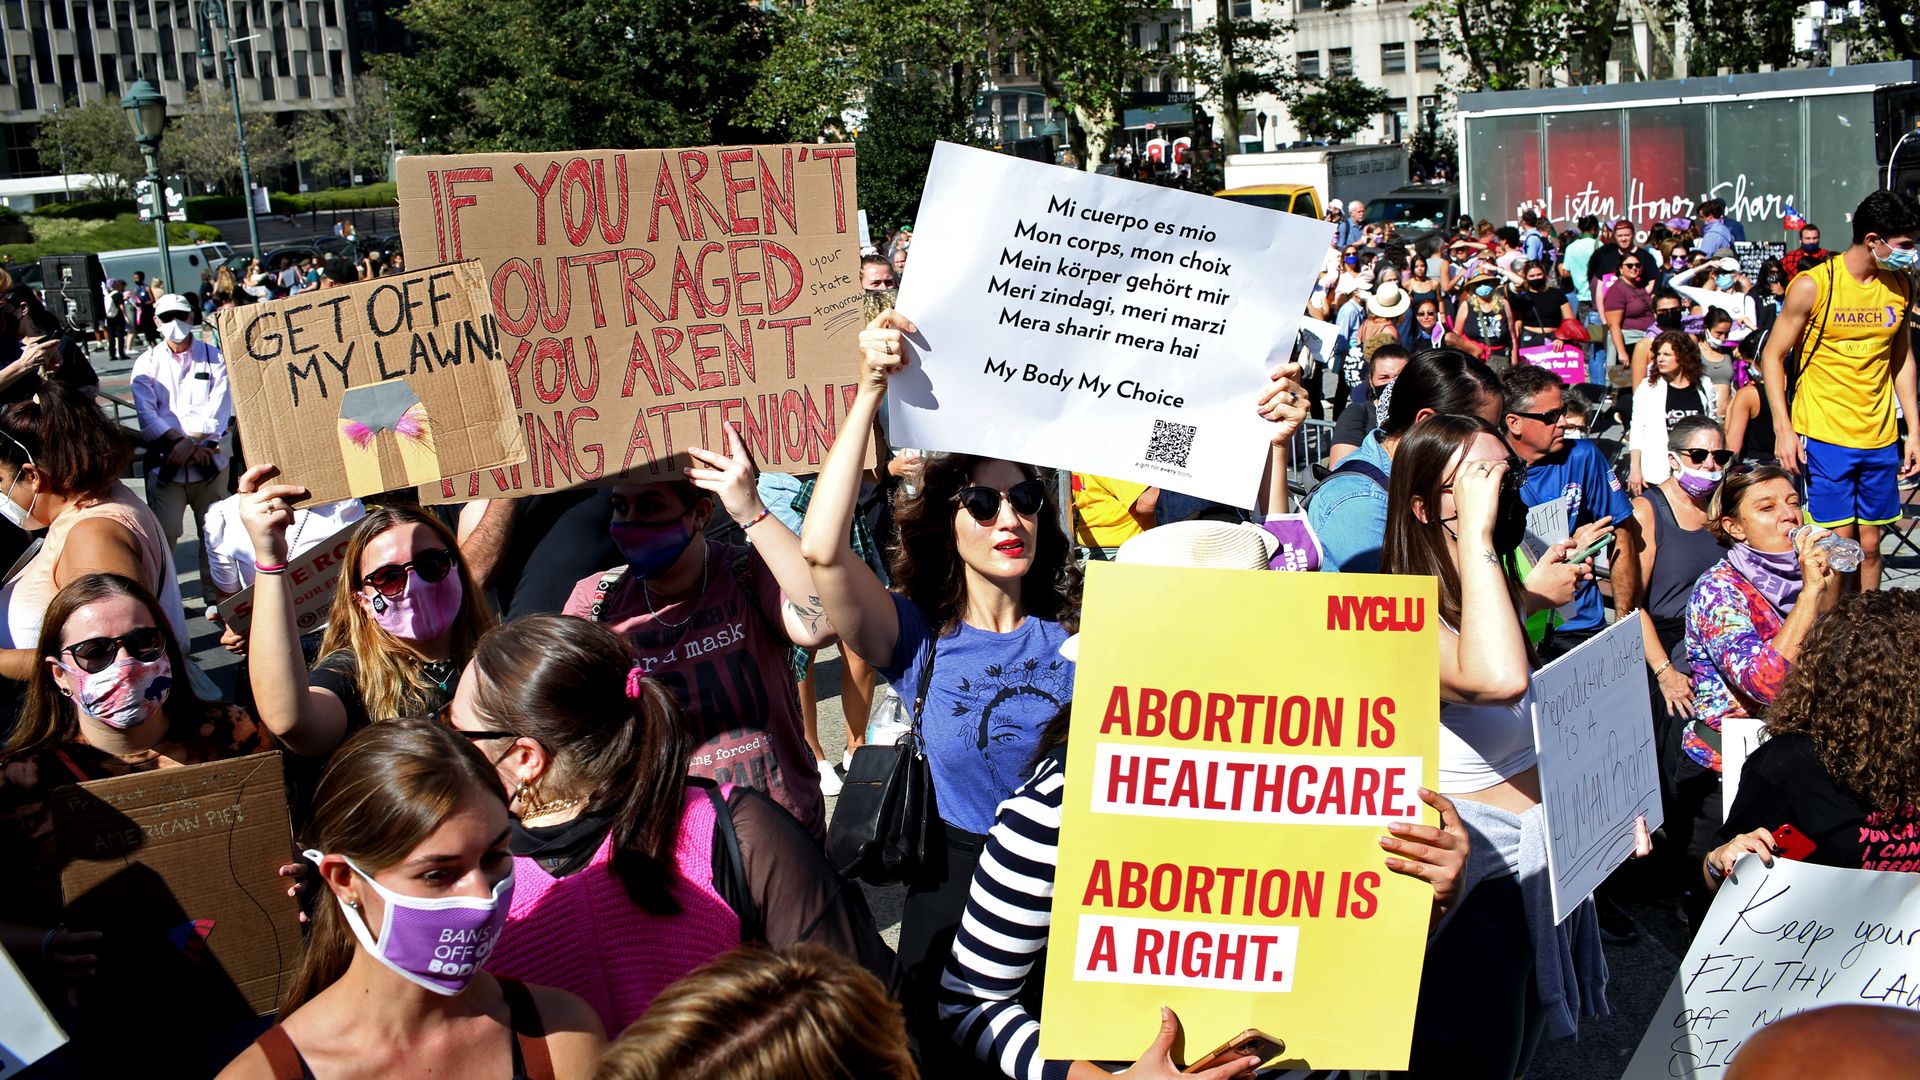 People rallying in support of abortion rights in New York City on Oct. 2.